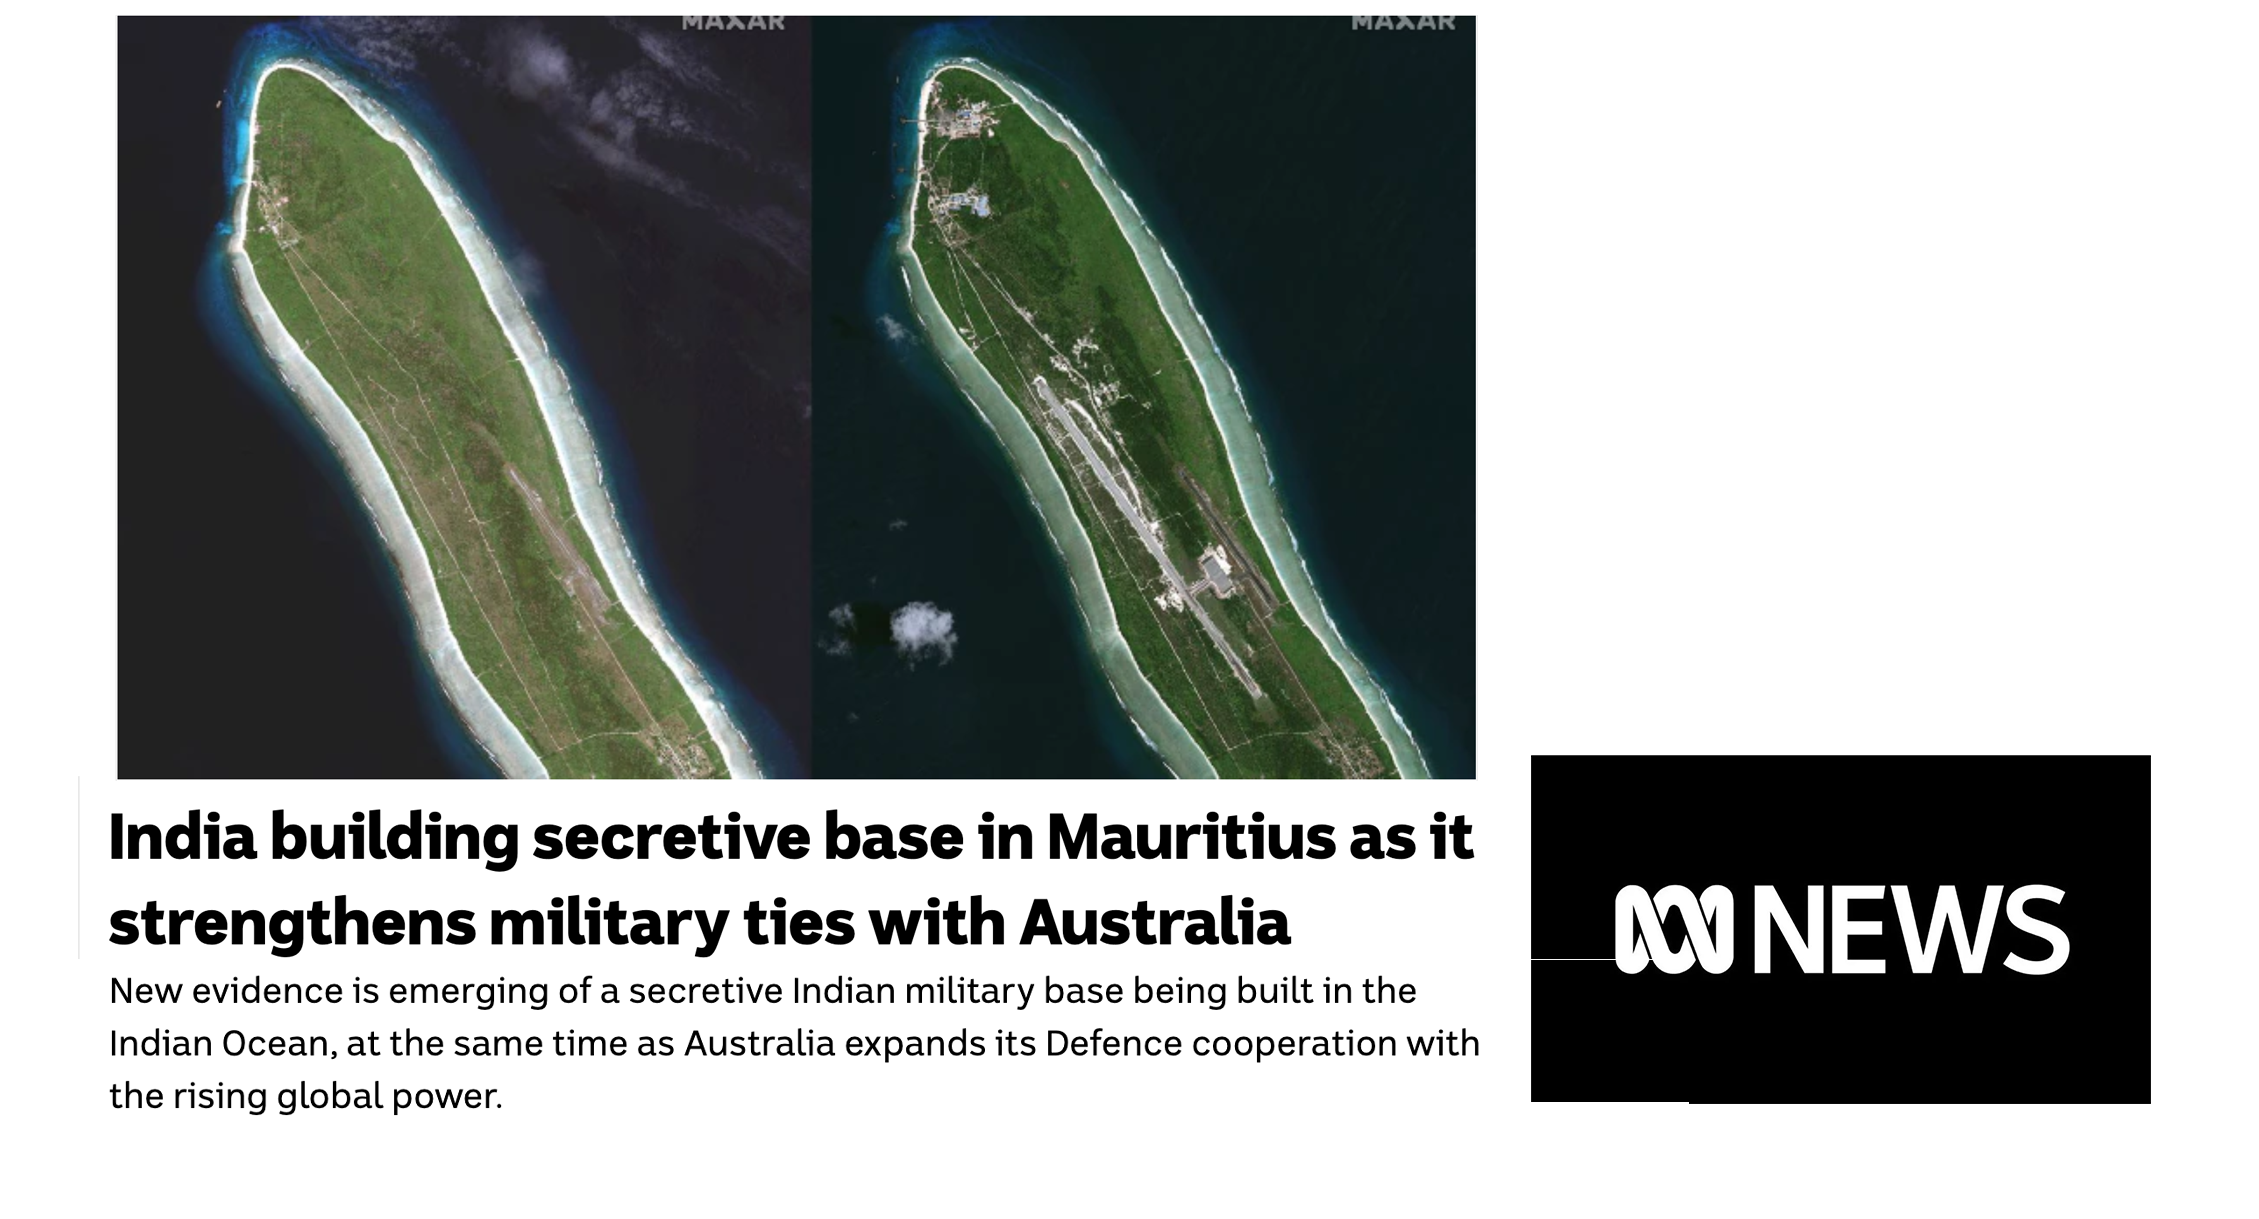 India building secretive base in Mauritius as it strengthens military ties with Australia